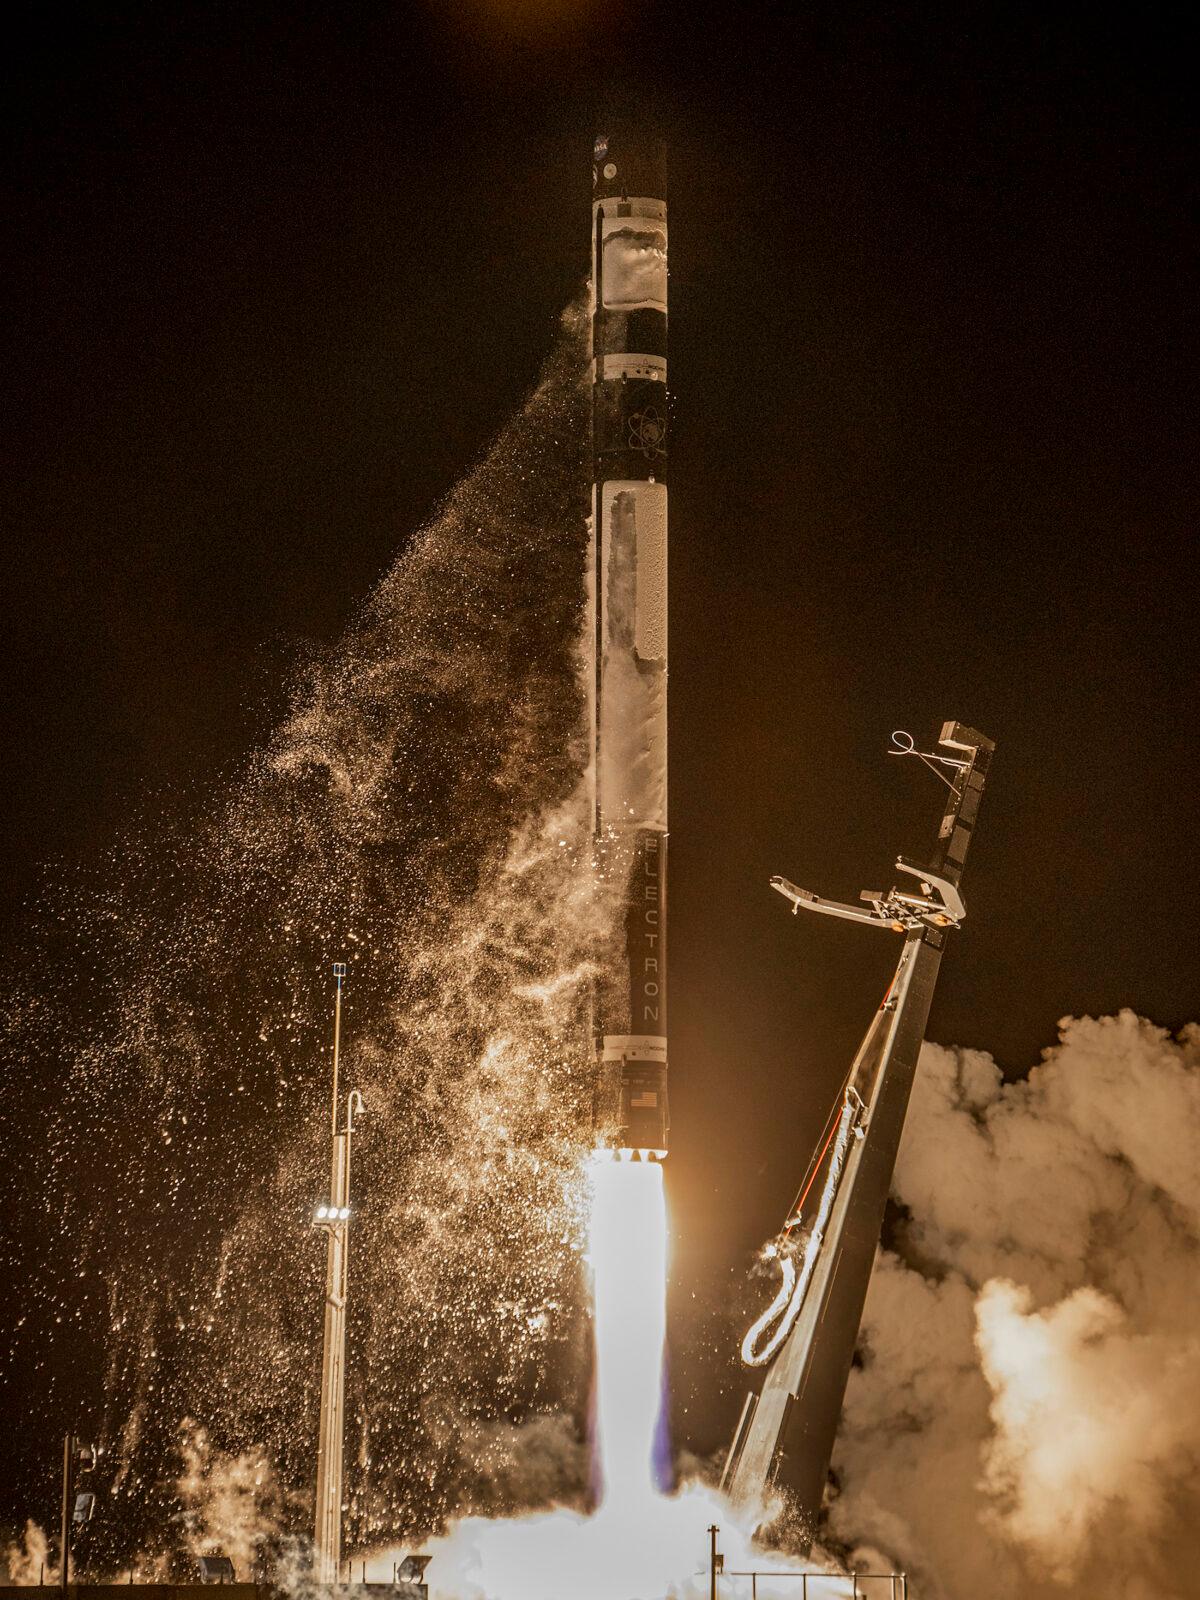  Rocket Lab's Electron rocket is successfully launched on the Mahia peninsula in New Zealand on June 28, 2022. (Rocket Lab via AP)